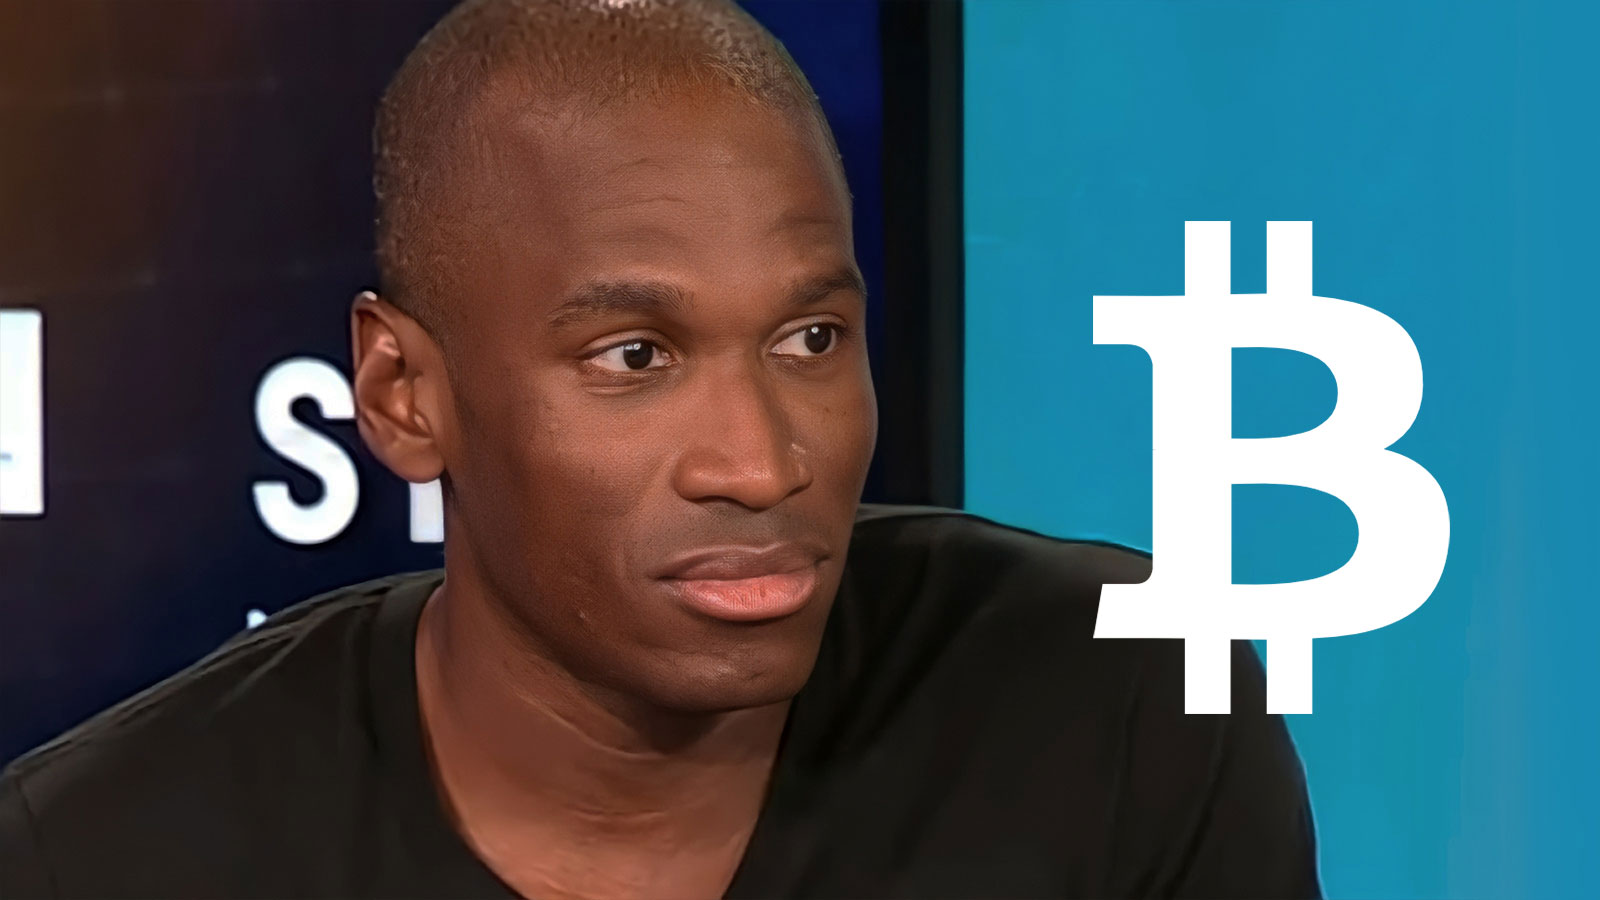 Here’s When Bitcoin May Hit $15,000, According to Arthur Hayes